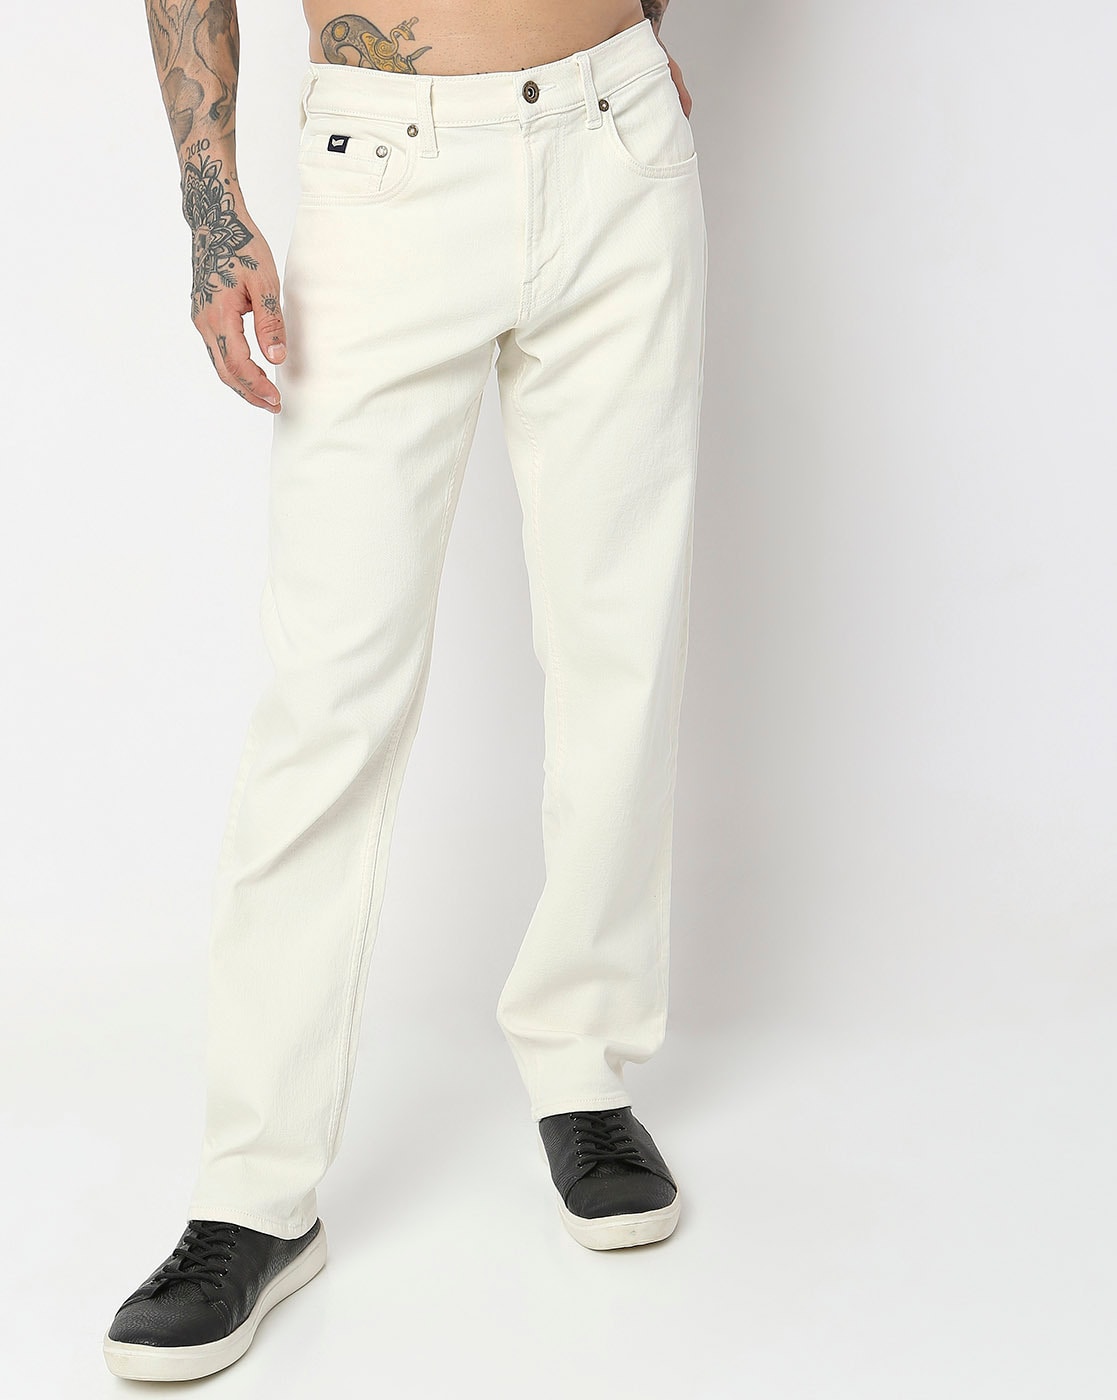 off white jean trousers